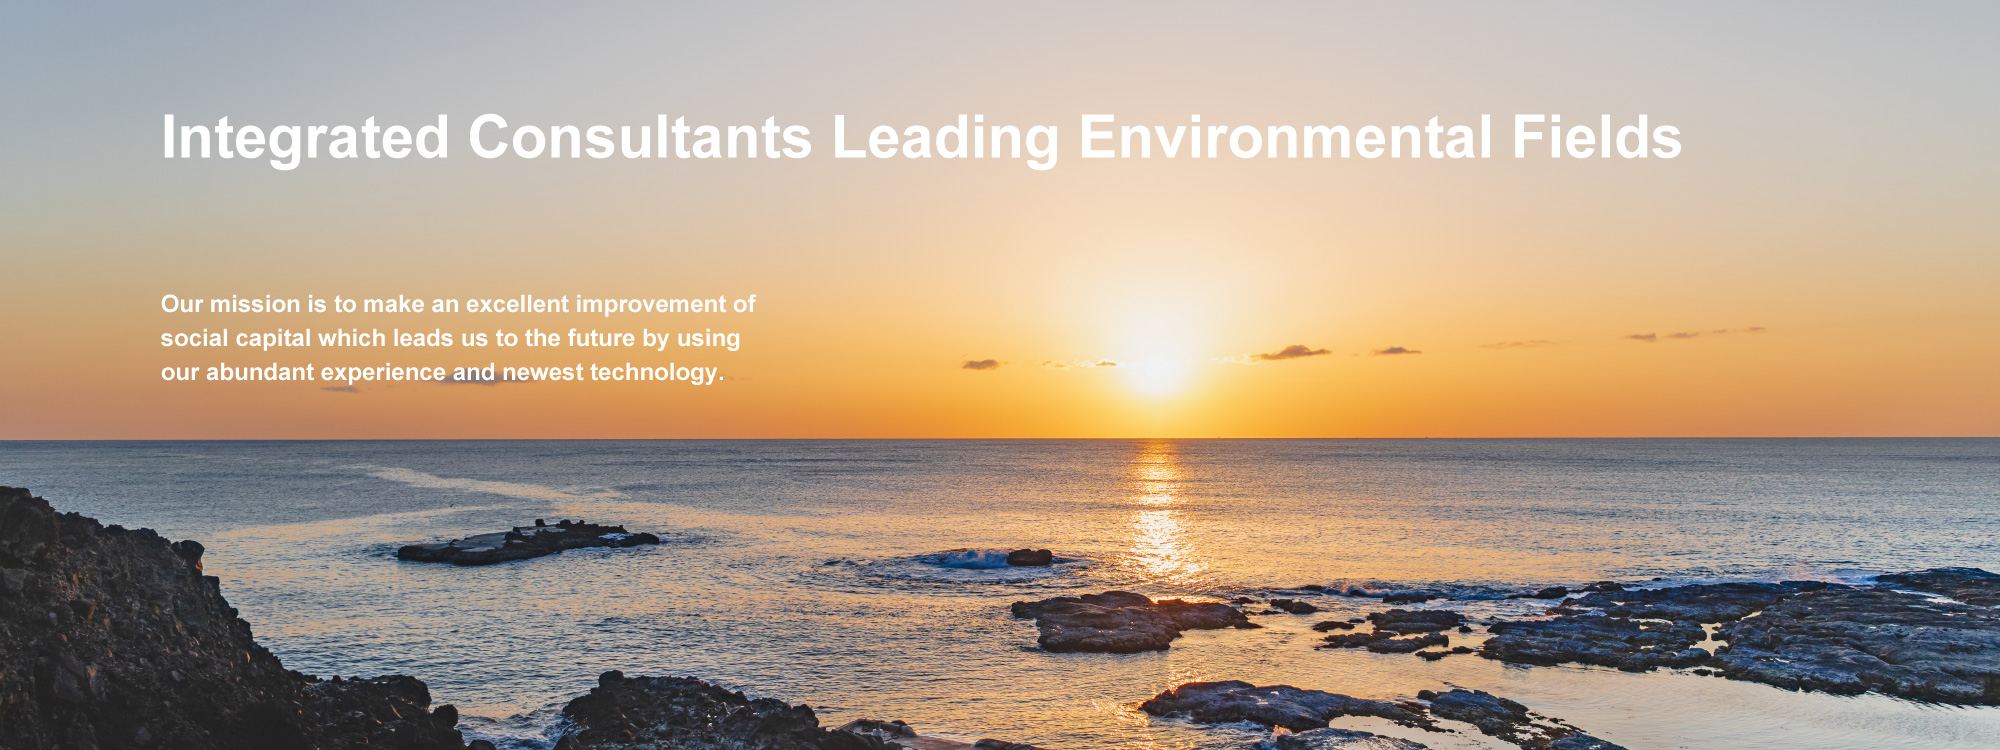 Integrated Consultants Leading Environmental Fields